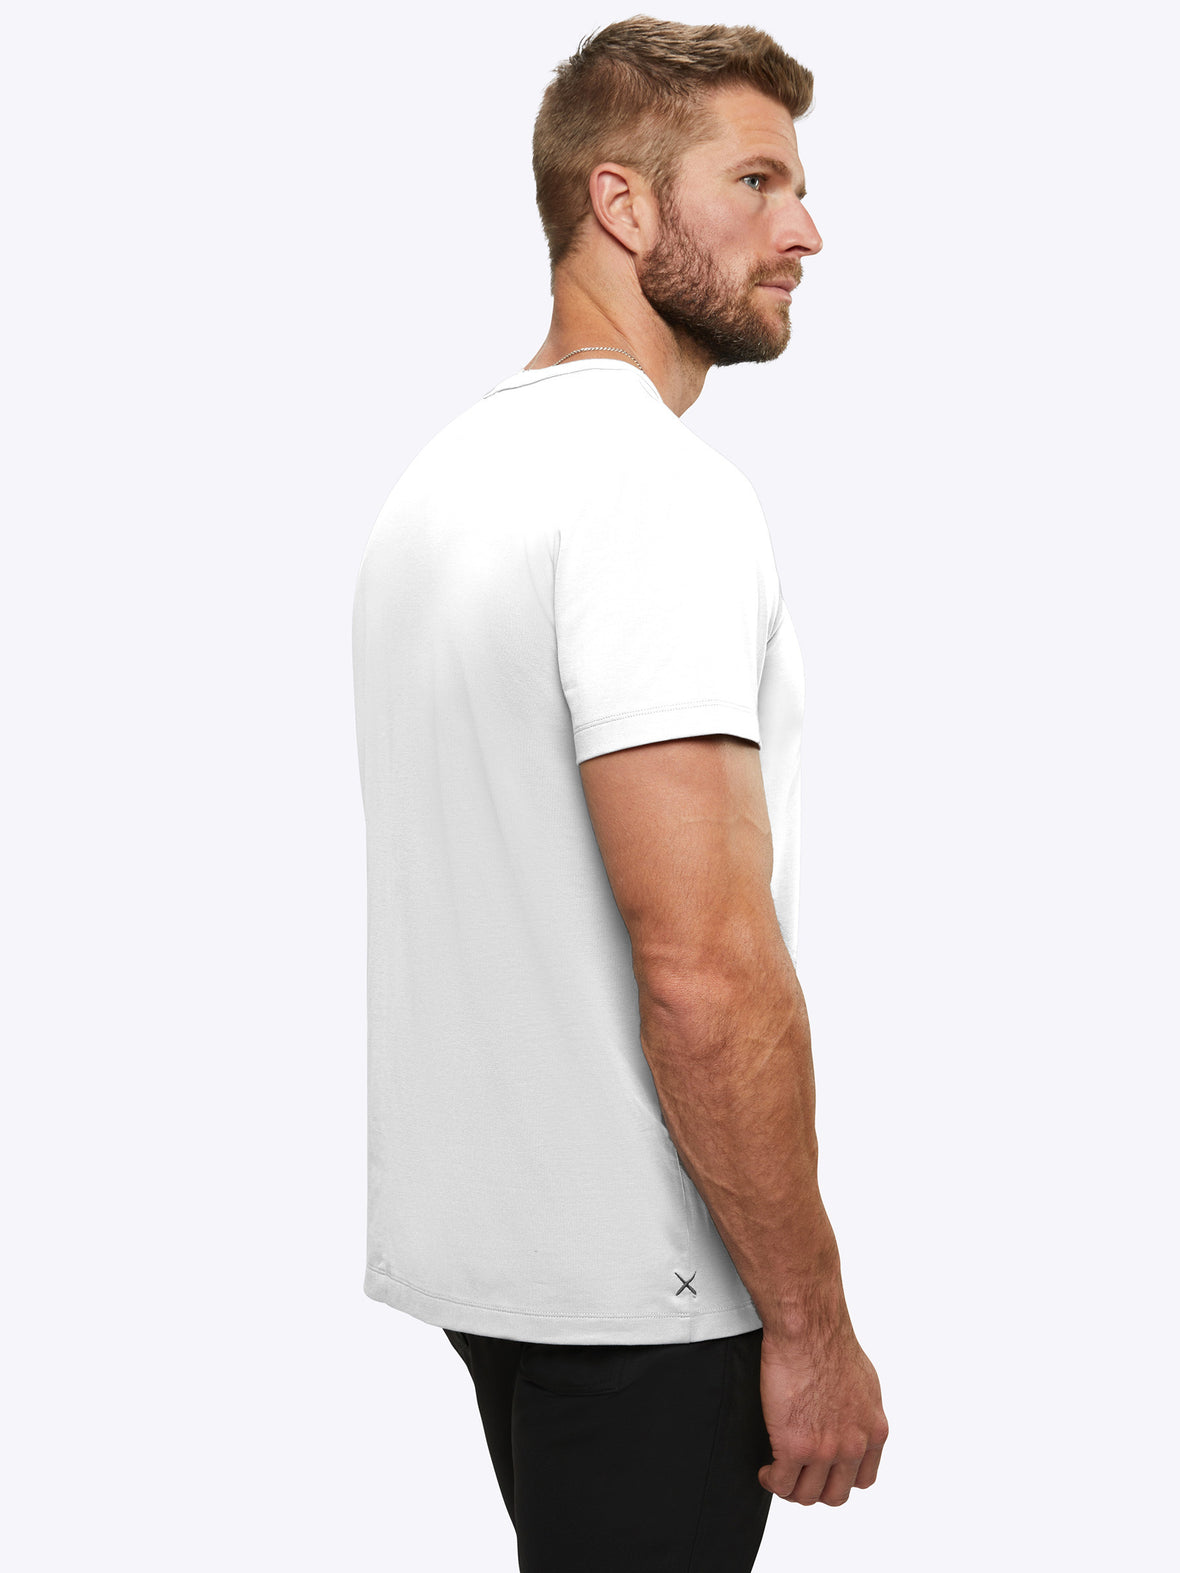 AO Forever Tee | White Classic-Fit PYCA Pro®